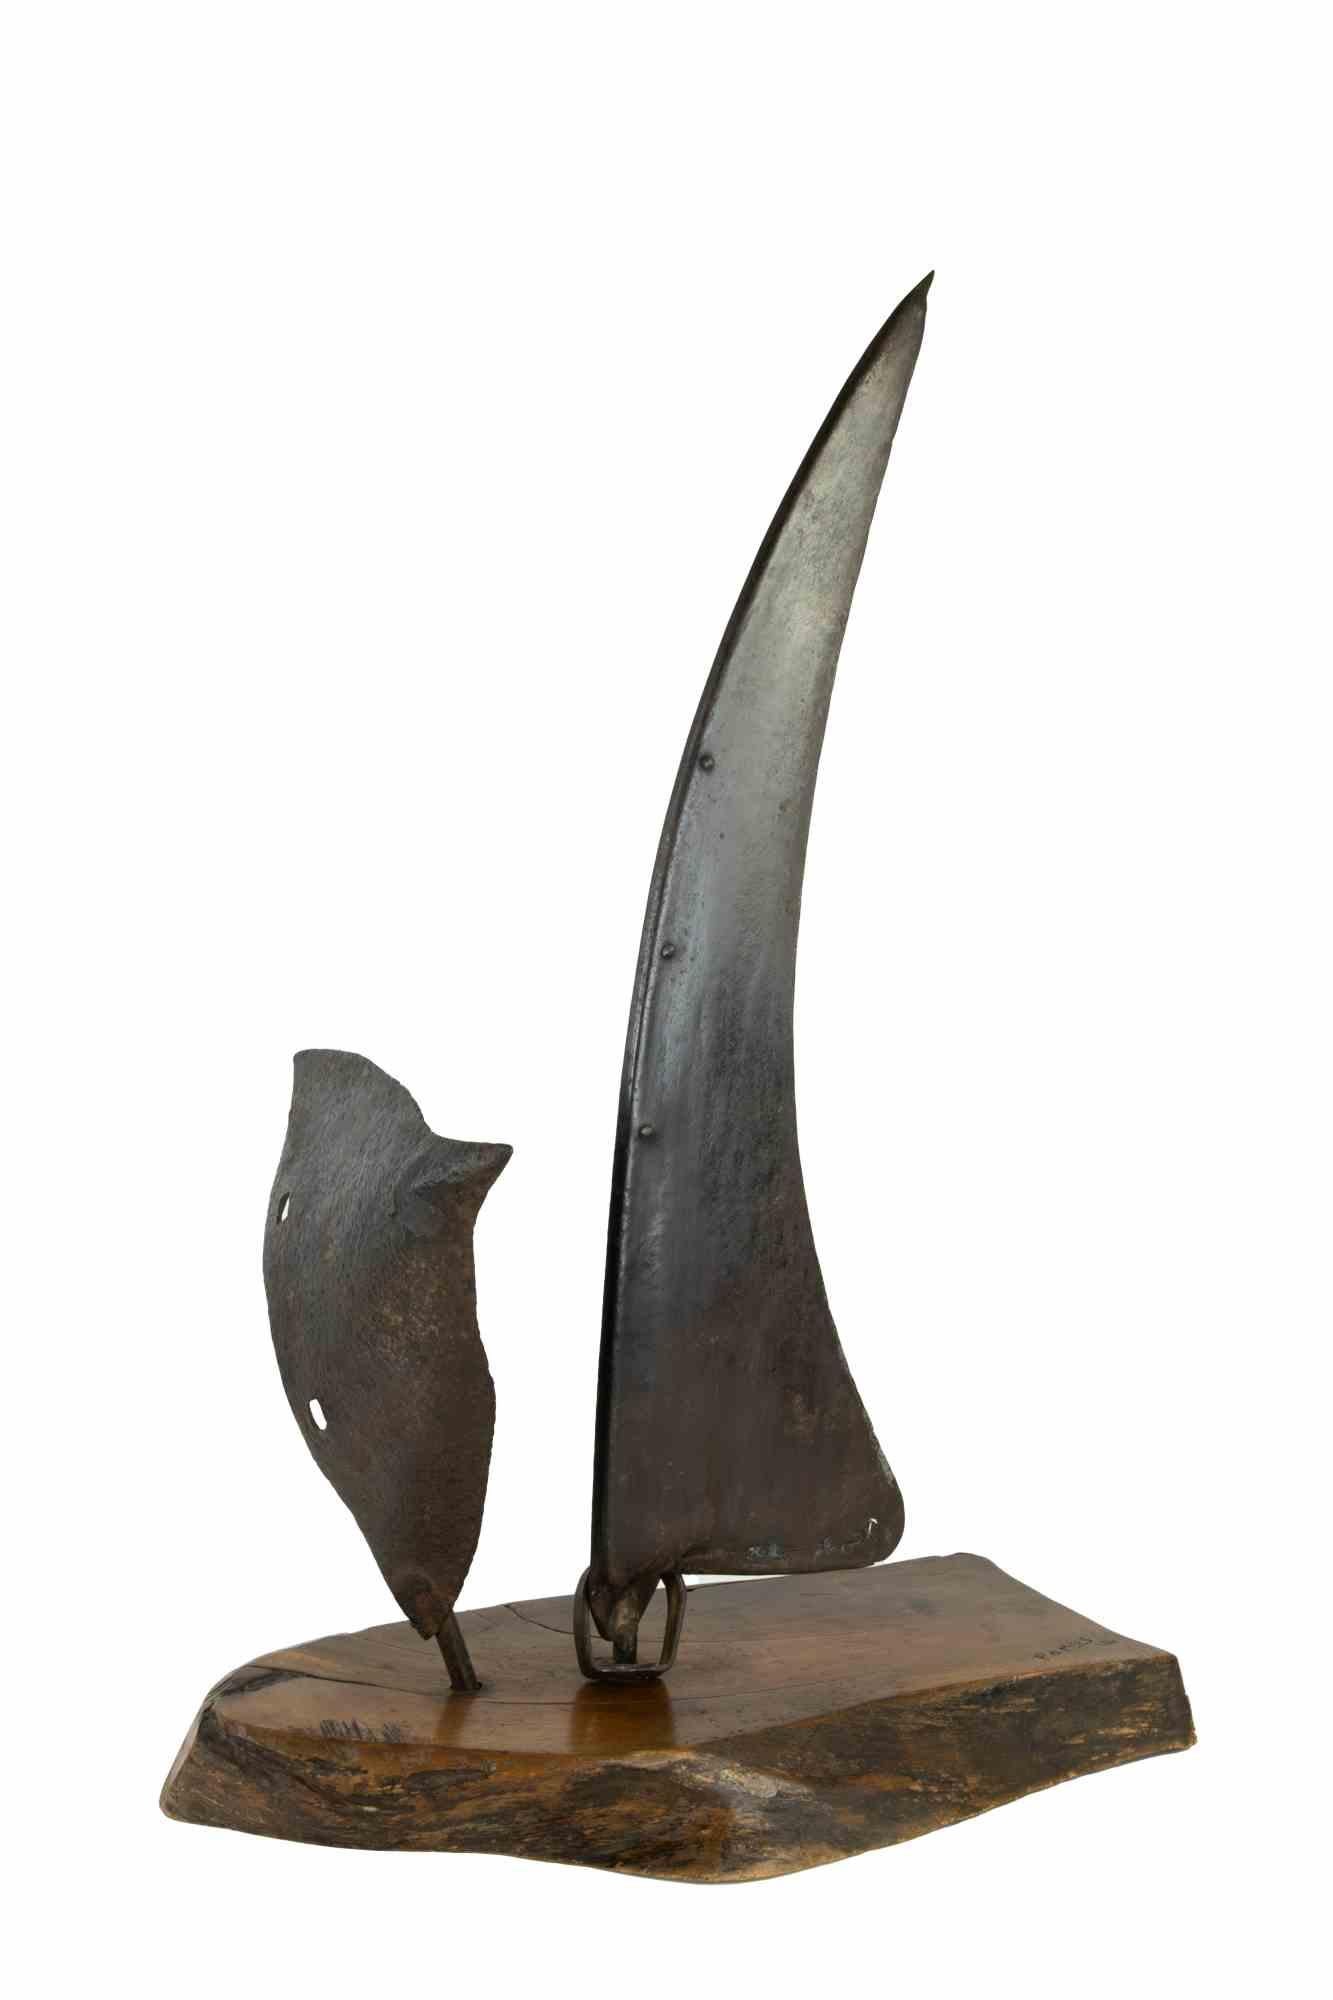 The Sails is a contemporary artwork realized by the artist Tatiana Pomus in 1974.

Wood and iron sculpture.

Signature of the artist engraved on the base. 

